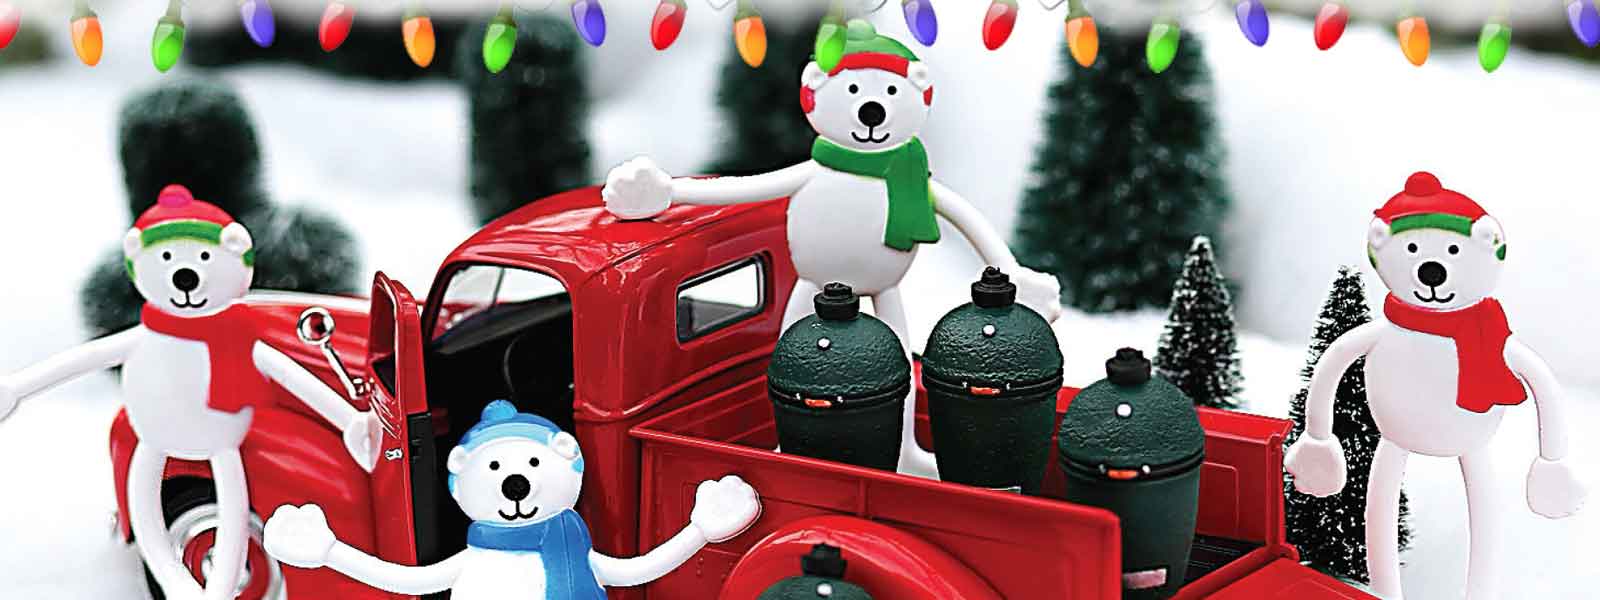 Red truck with polar bears with Big Green Eggs and Christmas Trees